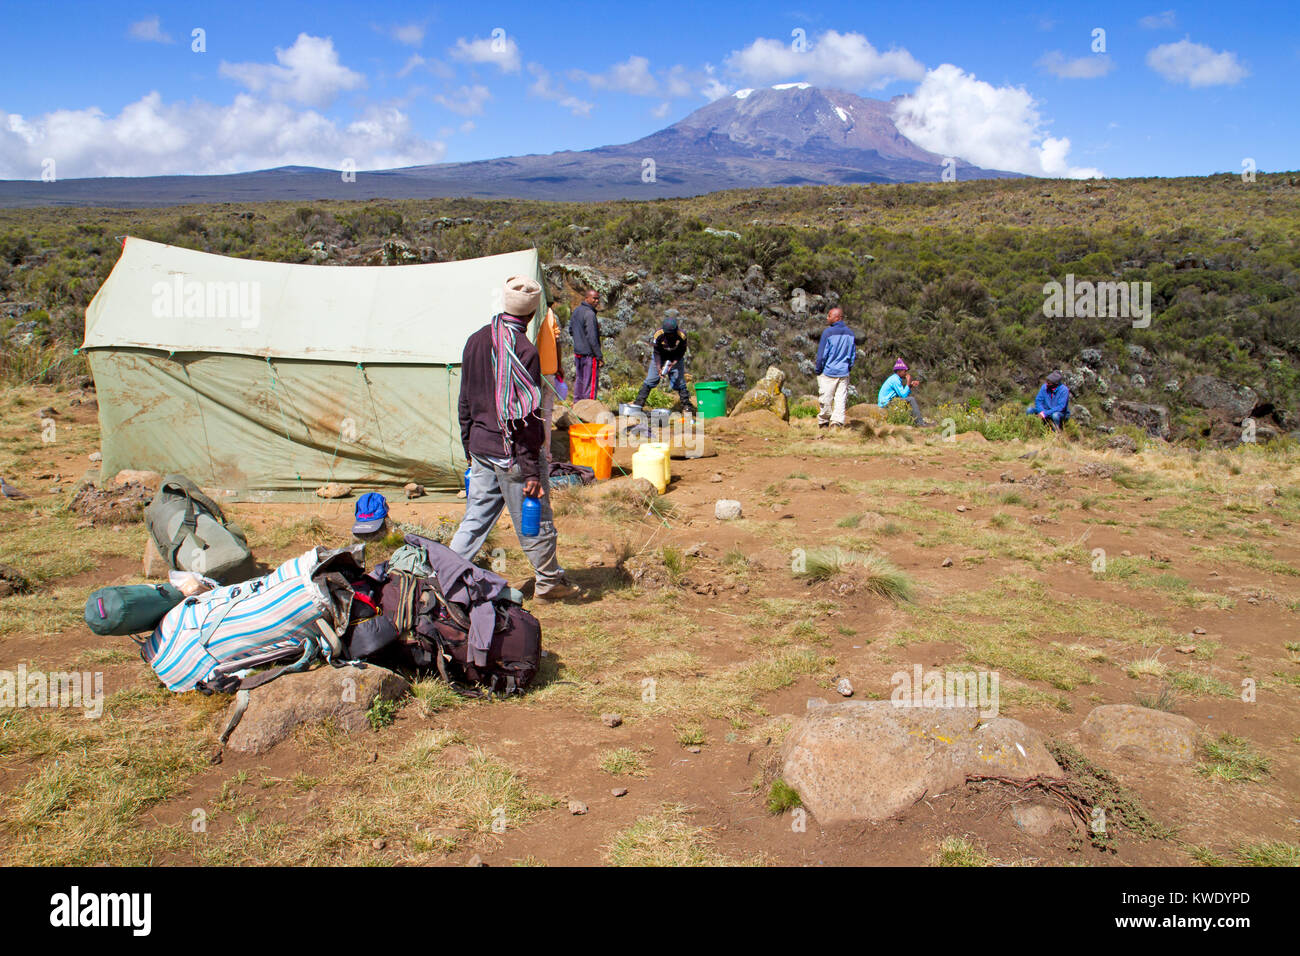 Porters in camp at Shira One on Mt Kilimanjaro Stock Photo